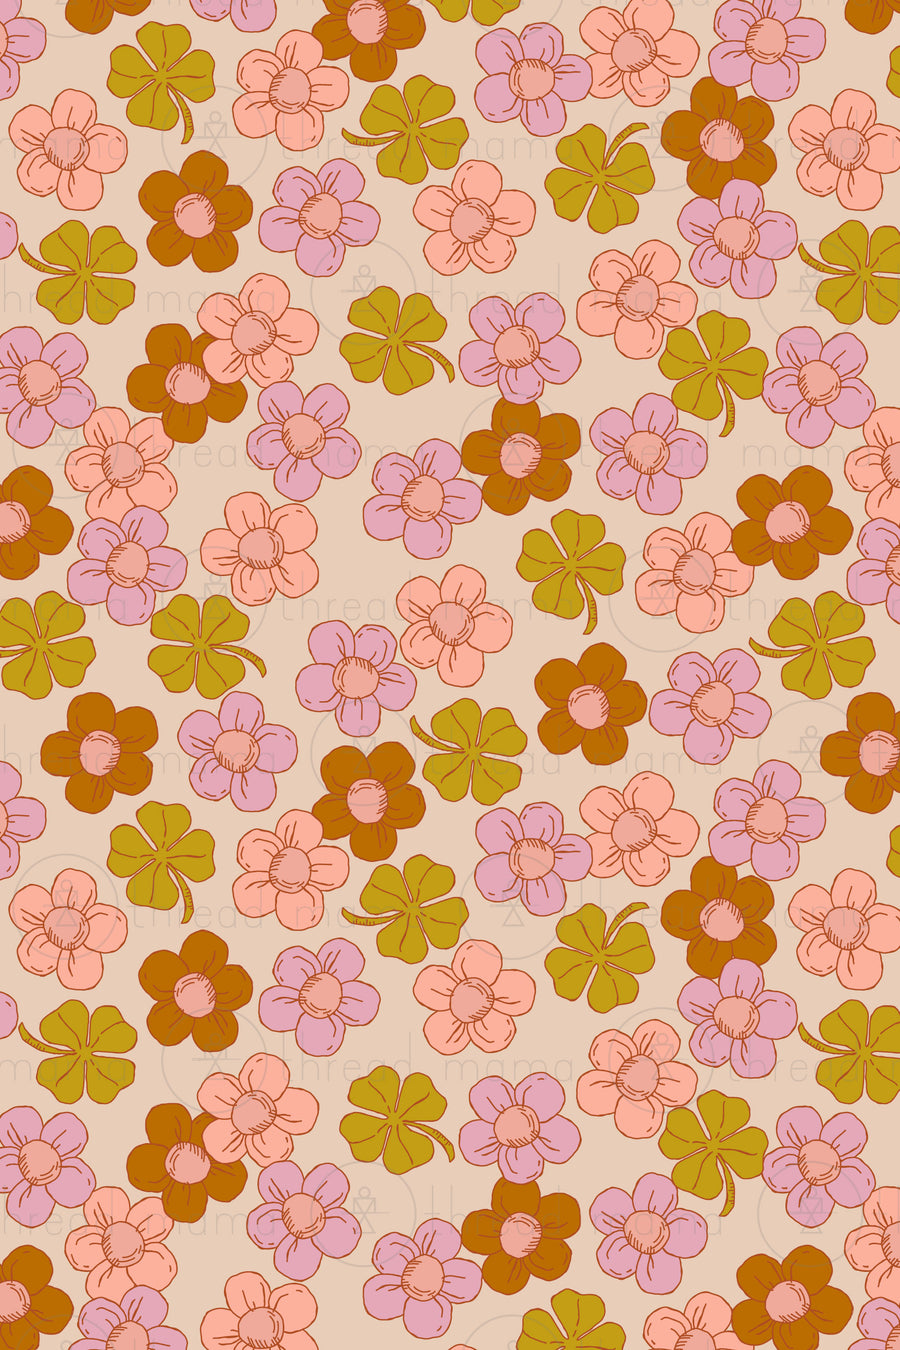 Repeating Pattern 204 (Seamless)